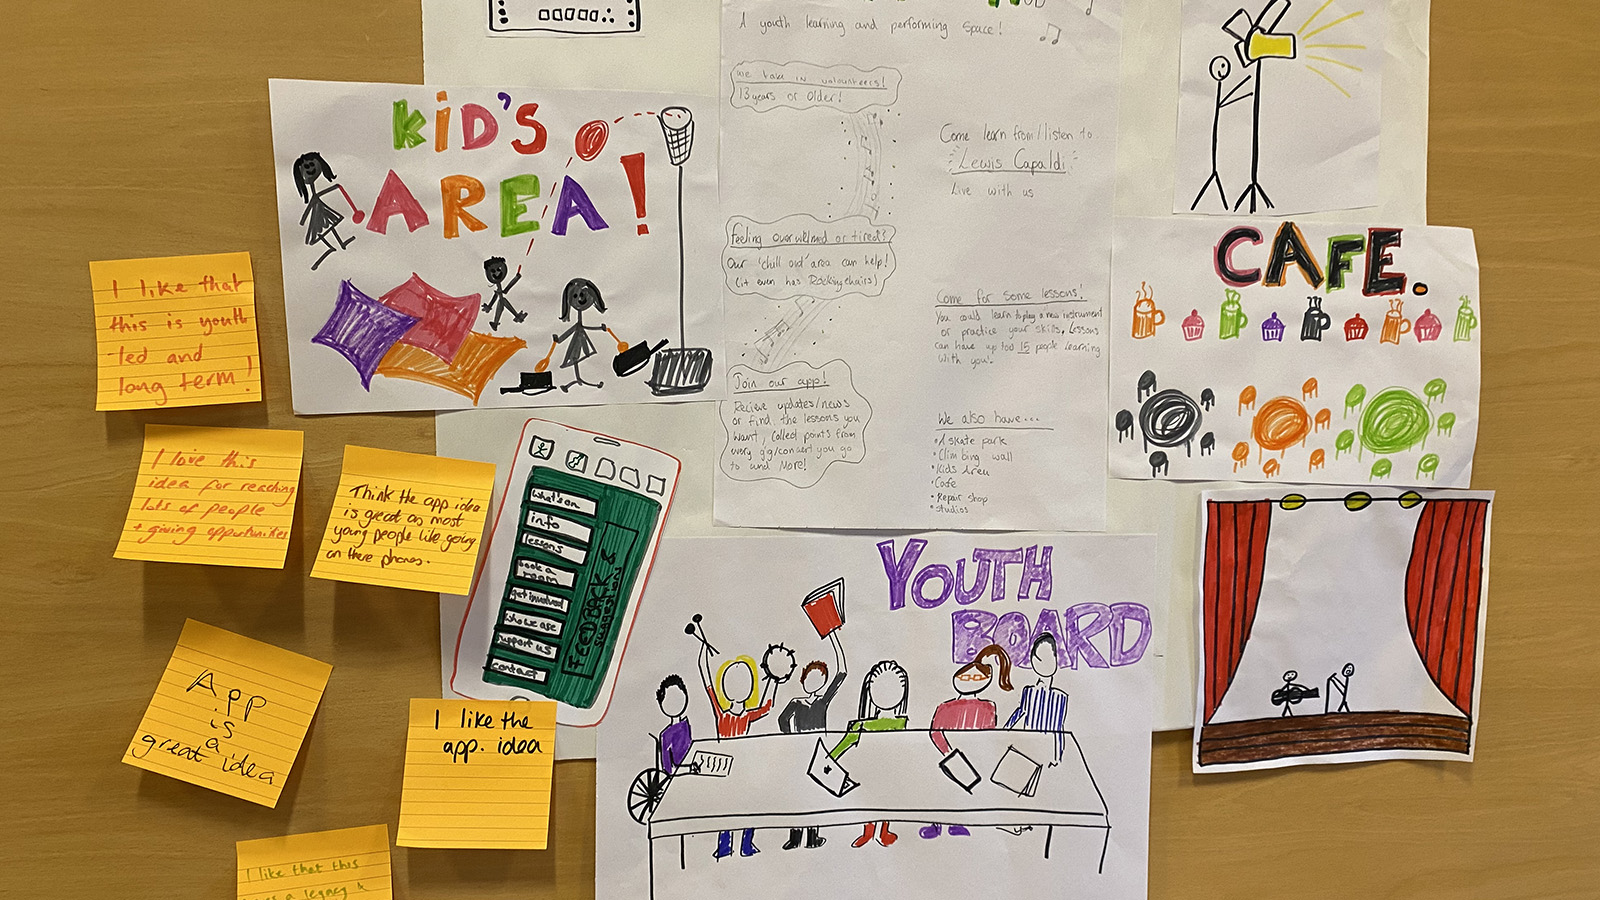 A close up shot of some drawing and writing on paper and post its pinned to a wall. The drawings are colourful and show things like a cafe with tables and chair and drinks, a stage with big red curtains and two performers, a ‘Youth Board’ with people around a table, a ‘Kids Area’ with play mats and a basketball hoop.